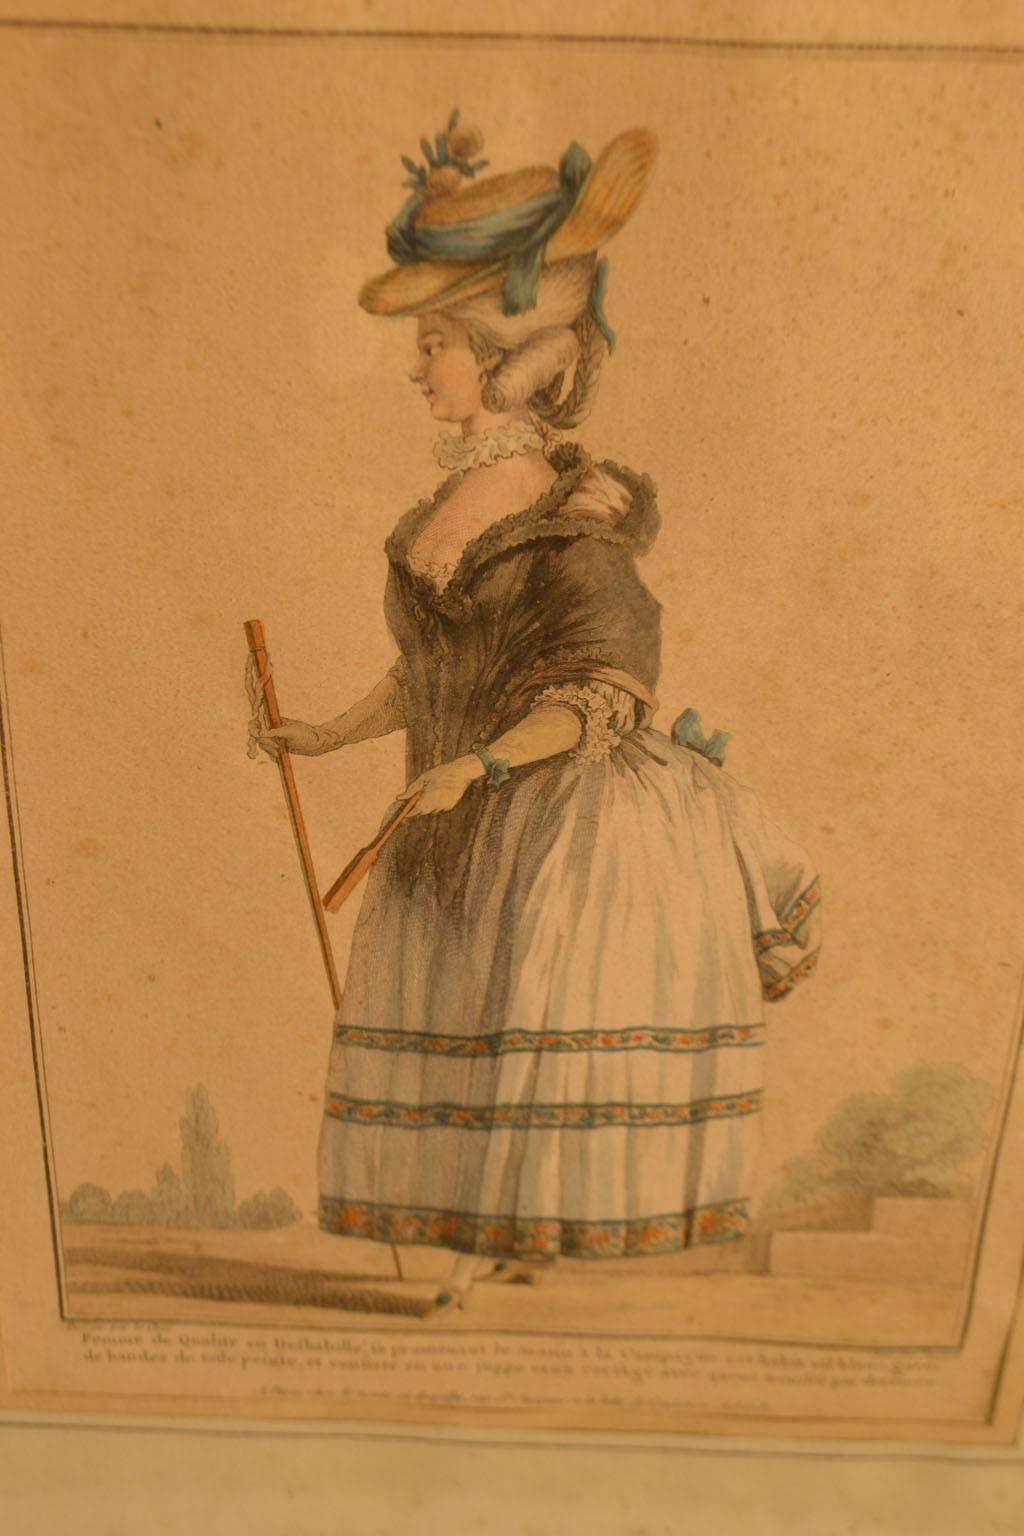 18th century framed fashion engraving of a woman with a plume feather hat with fan and a walking stick.